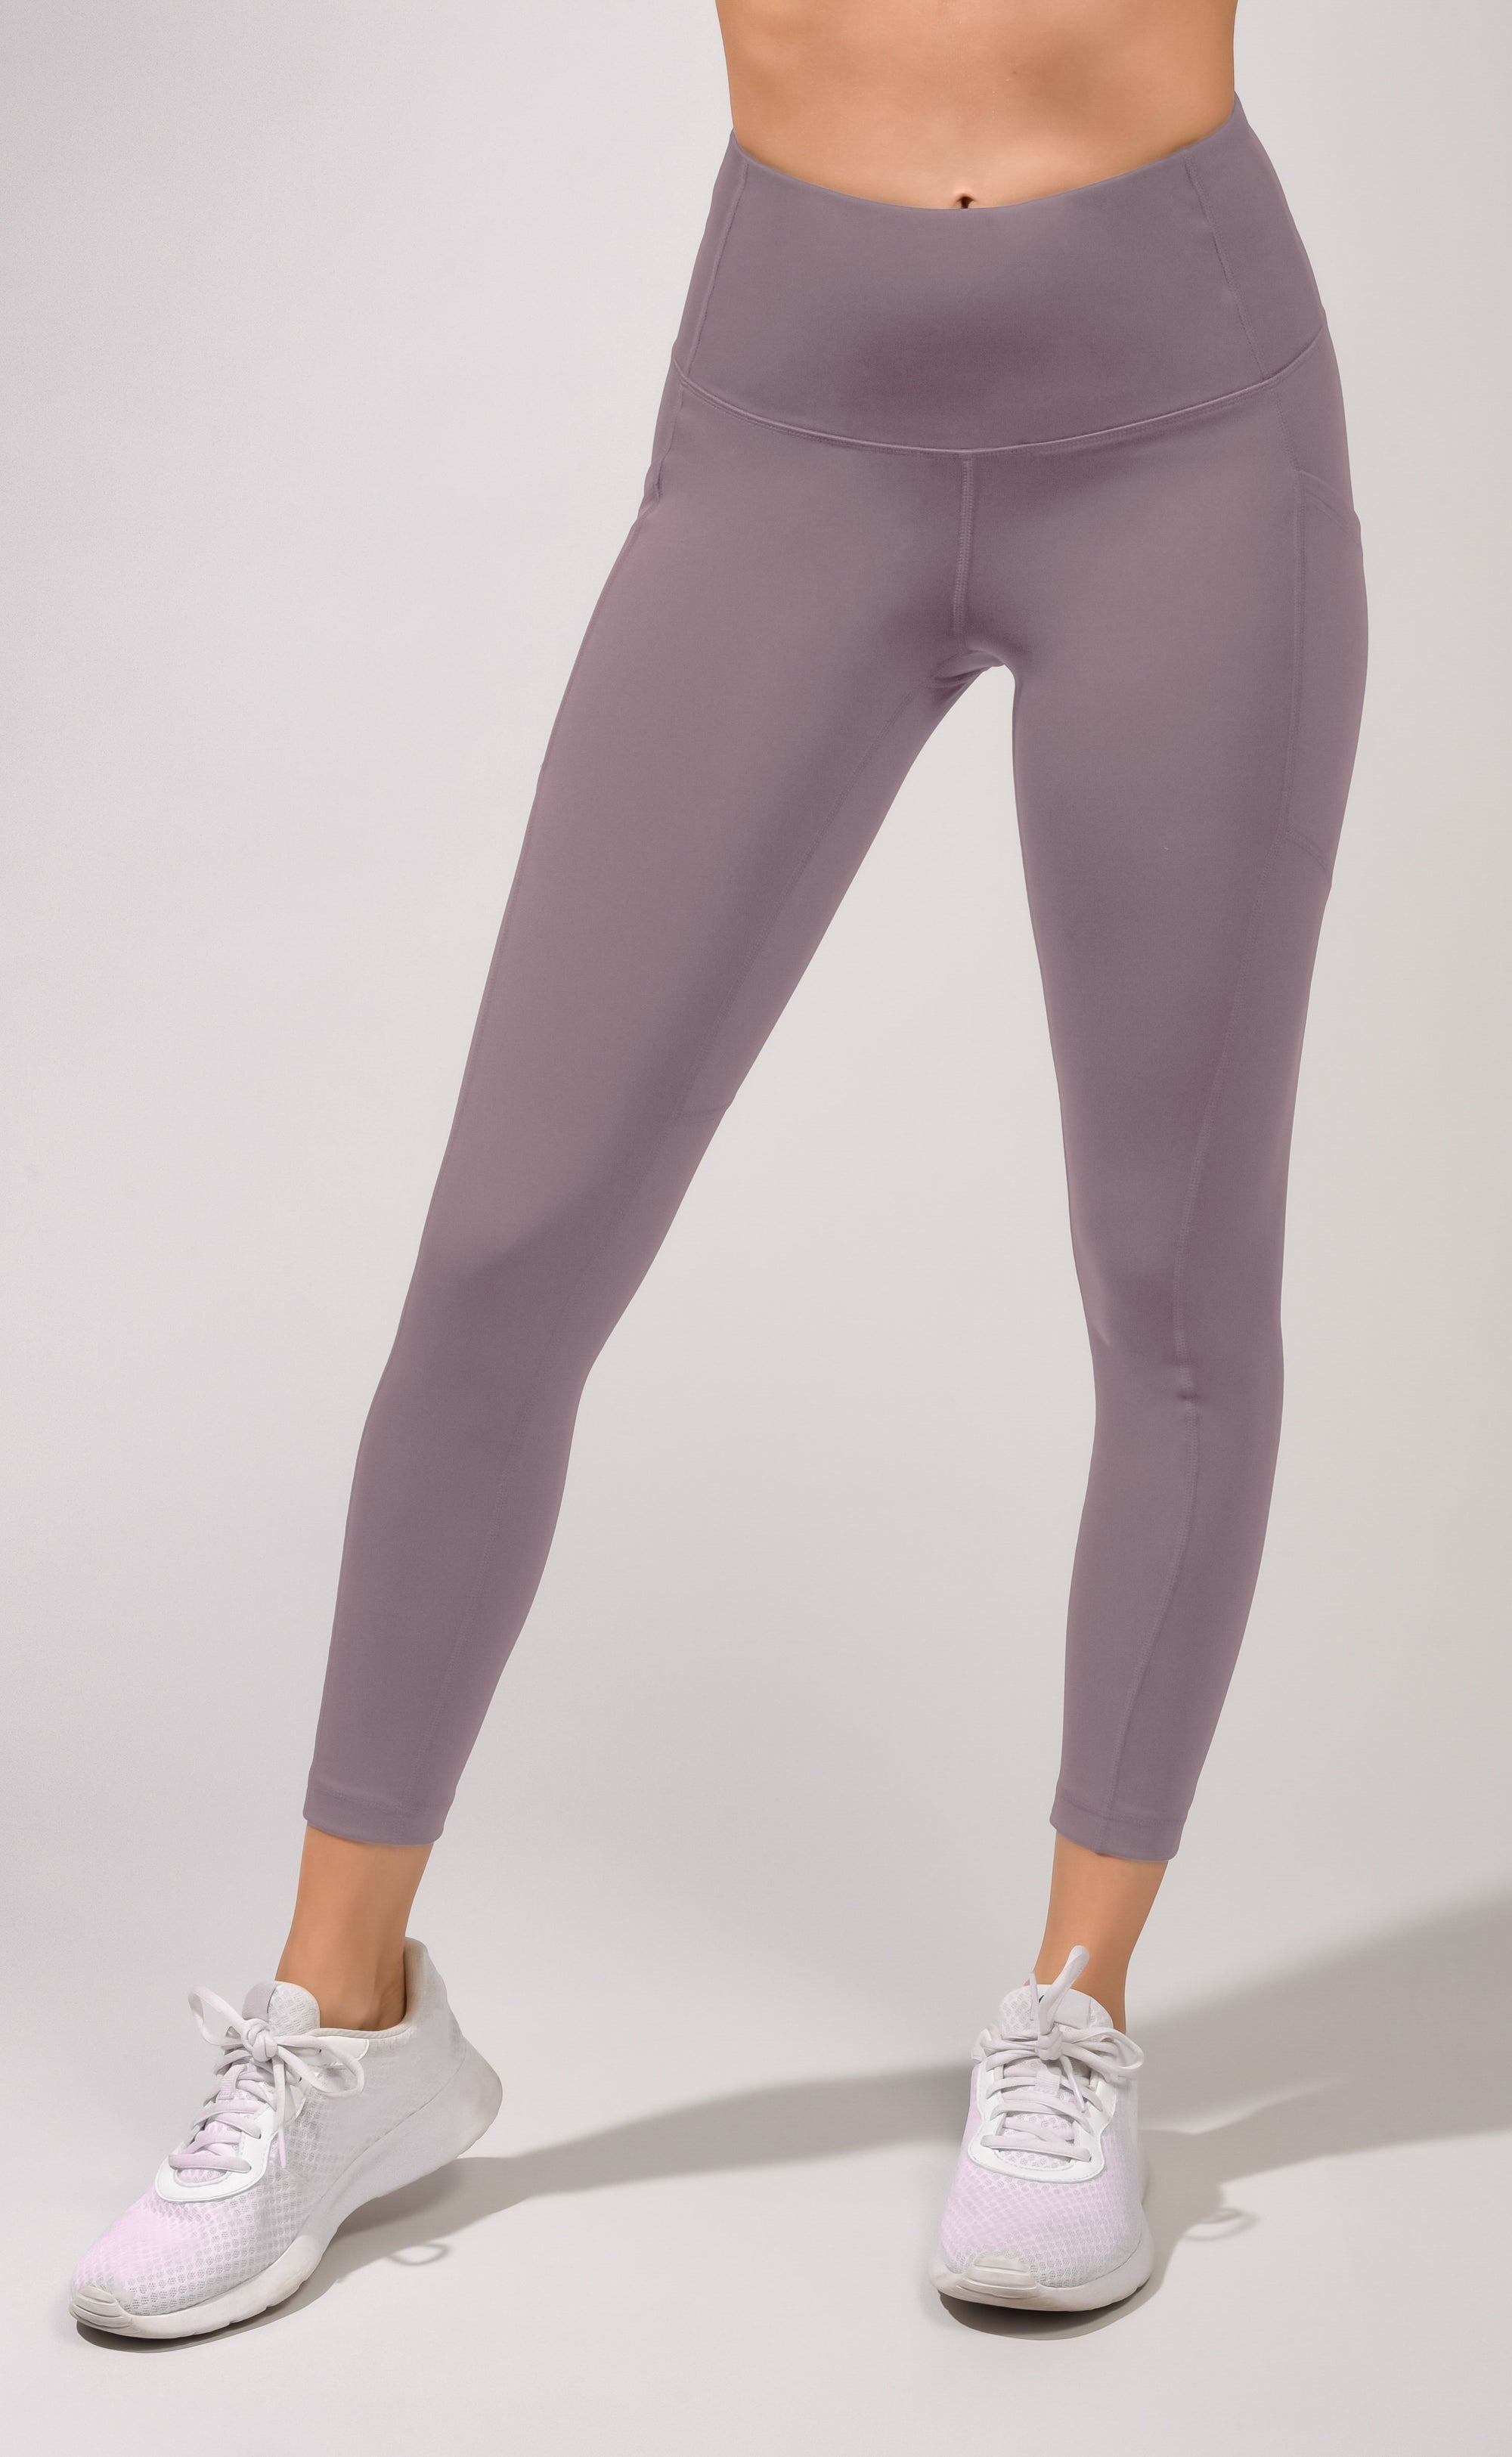 Yogalicious Lux High Waist 7/8 Ankle Legging- S